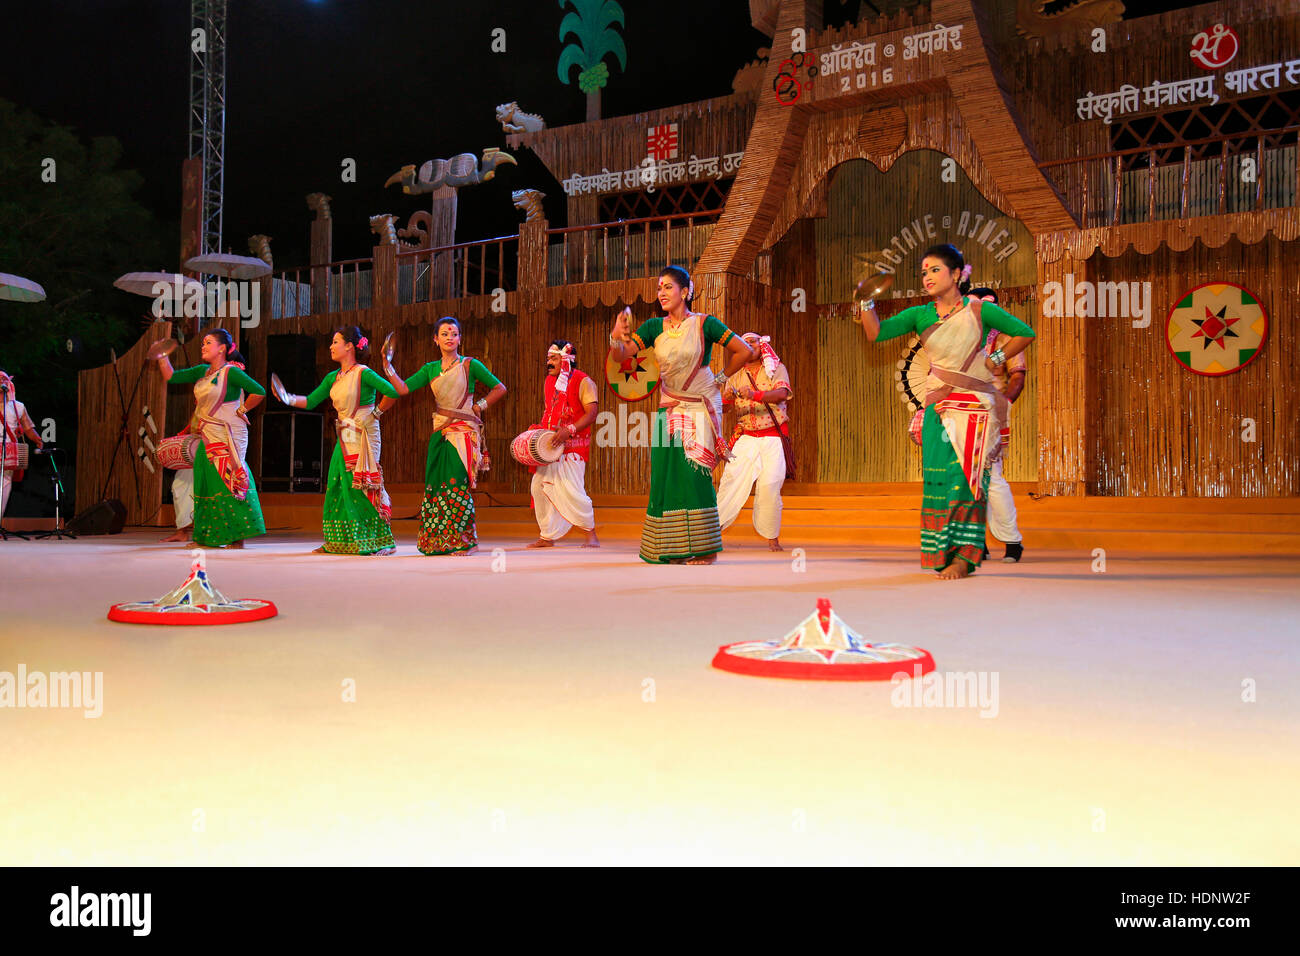 Tribal dancers From Assam performing Traditional Bodo dance Of Assam. Tribal Festival in Ajmer, Rajasthan, India Stock Photo